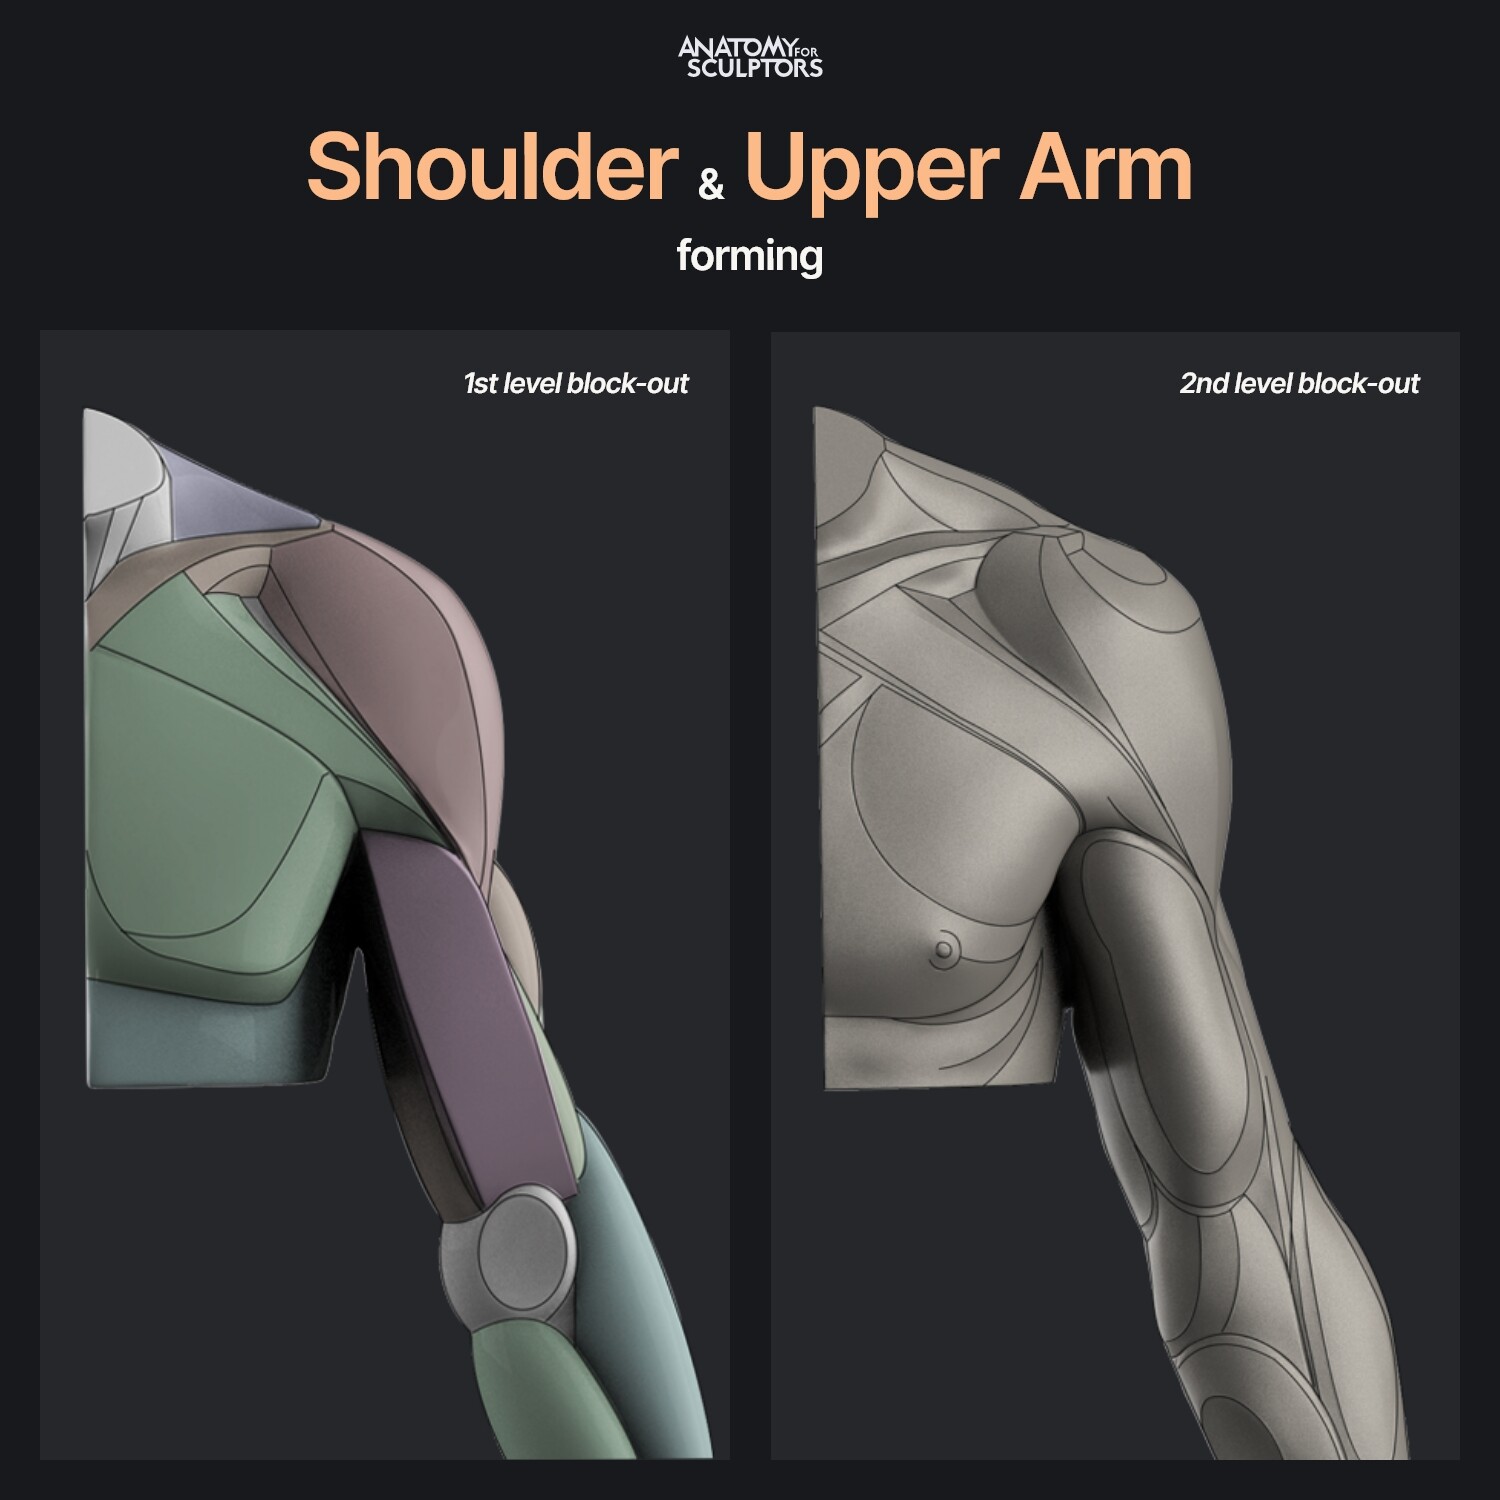 ArtStation - Muscles of the Upper Arm  Human anatomy drawing, Anatomy for  artists, Arm anatomy